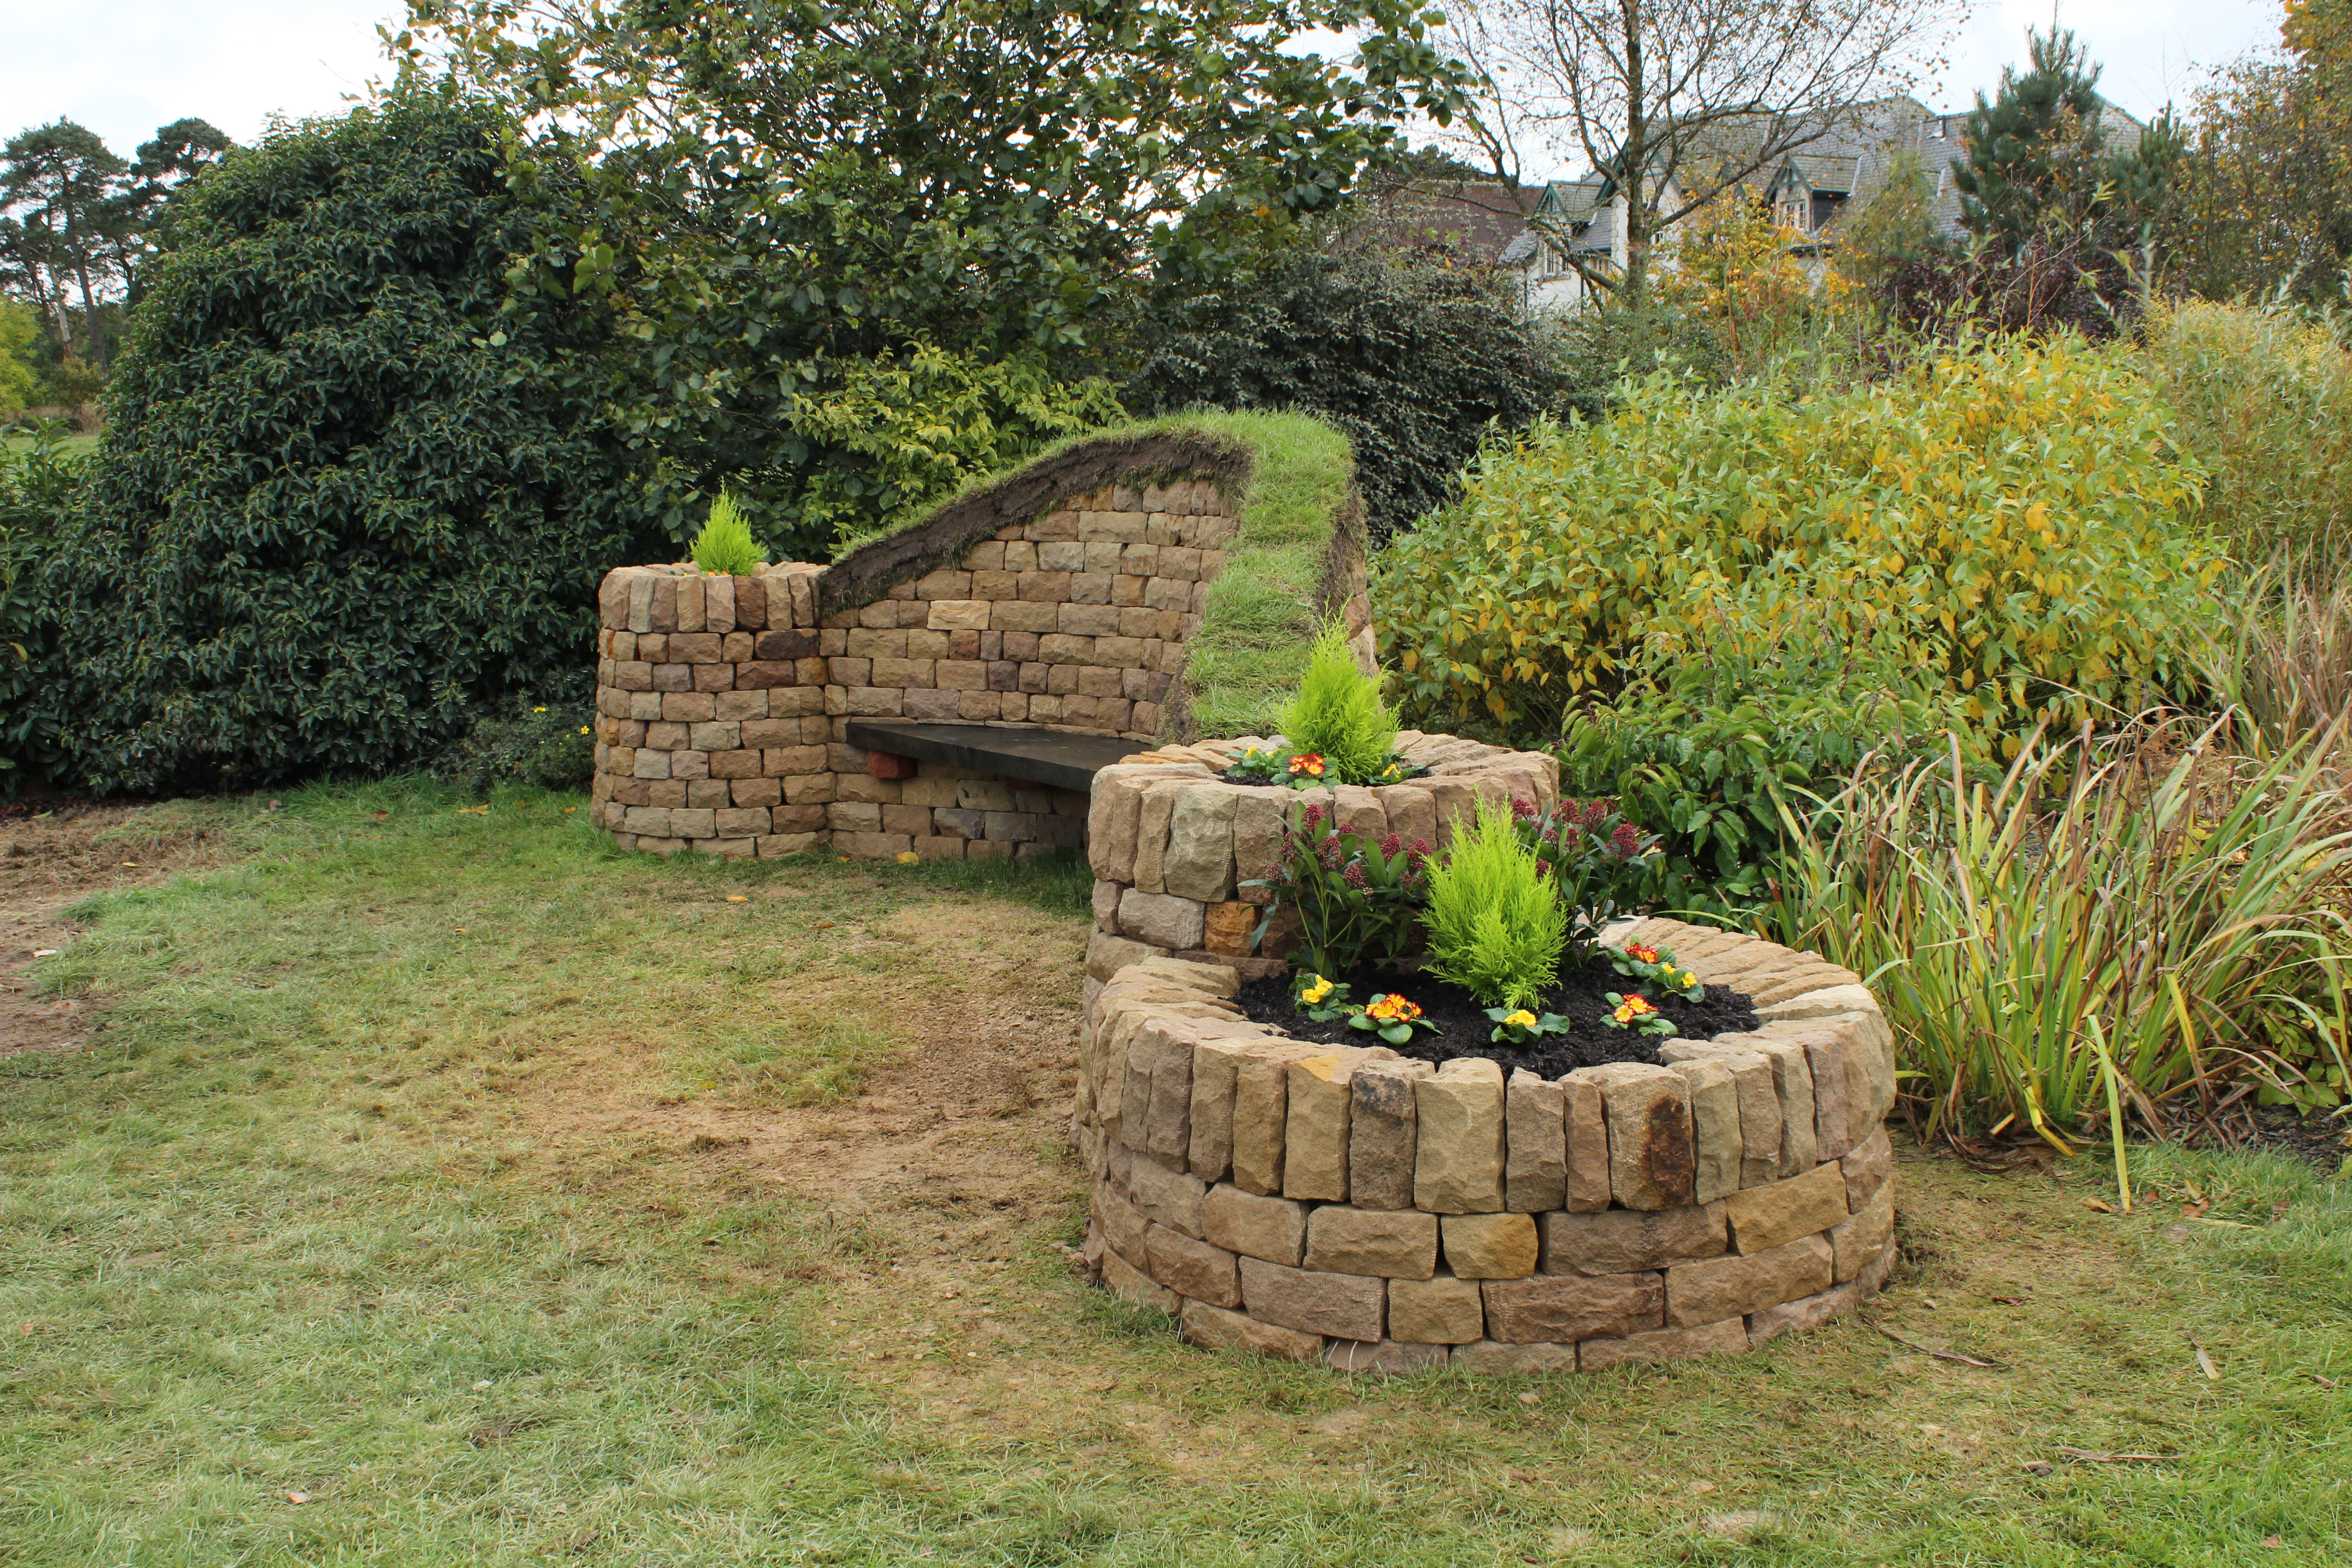 Dry stone, wood and turf bench